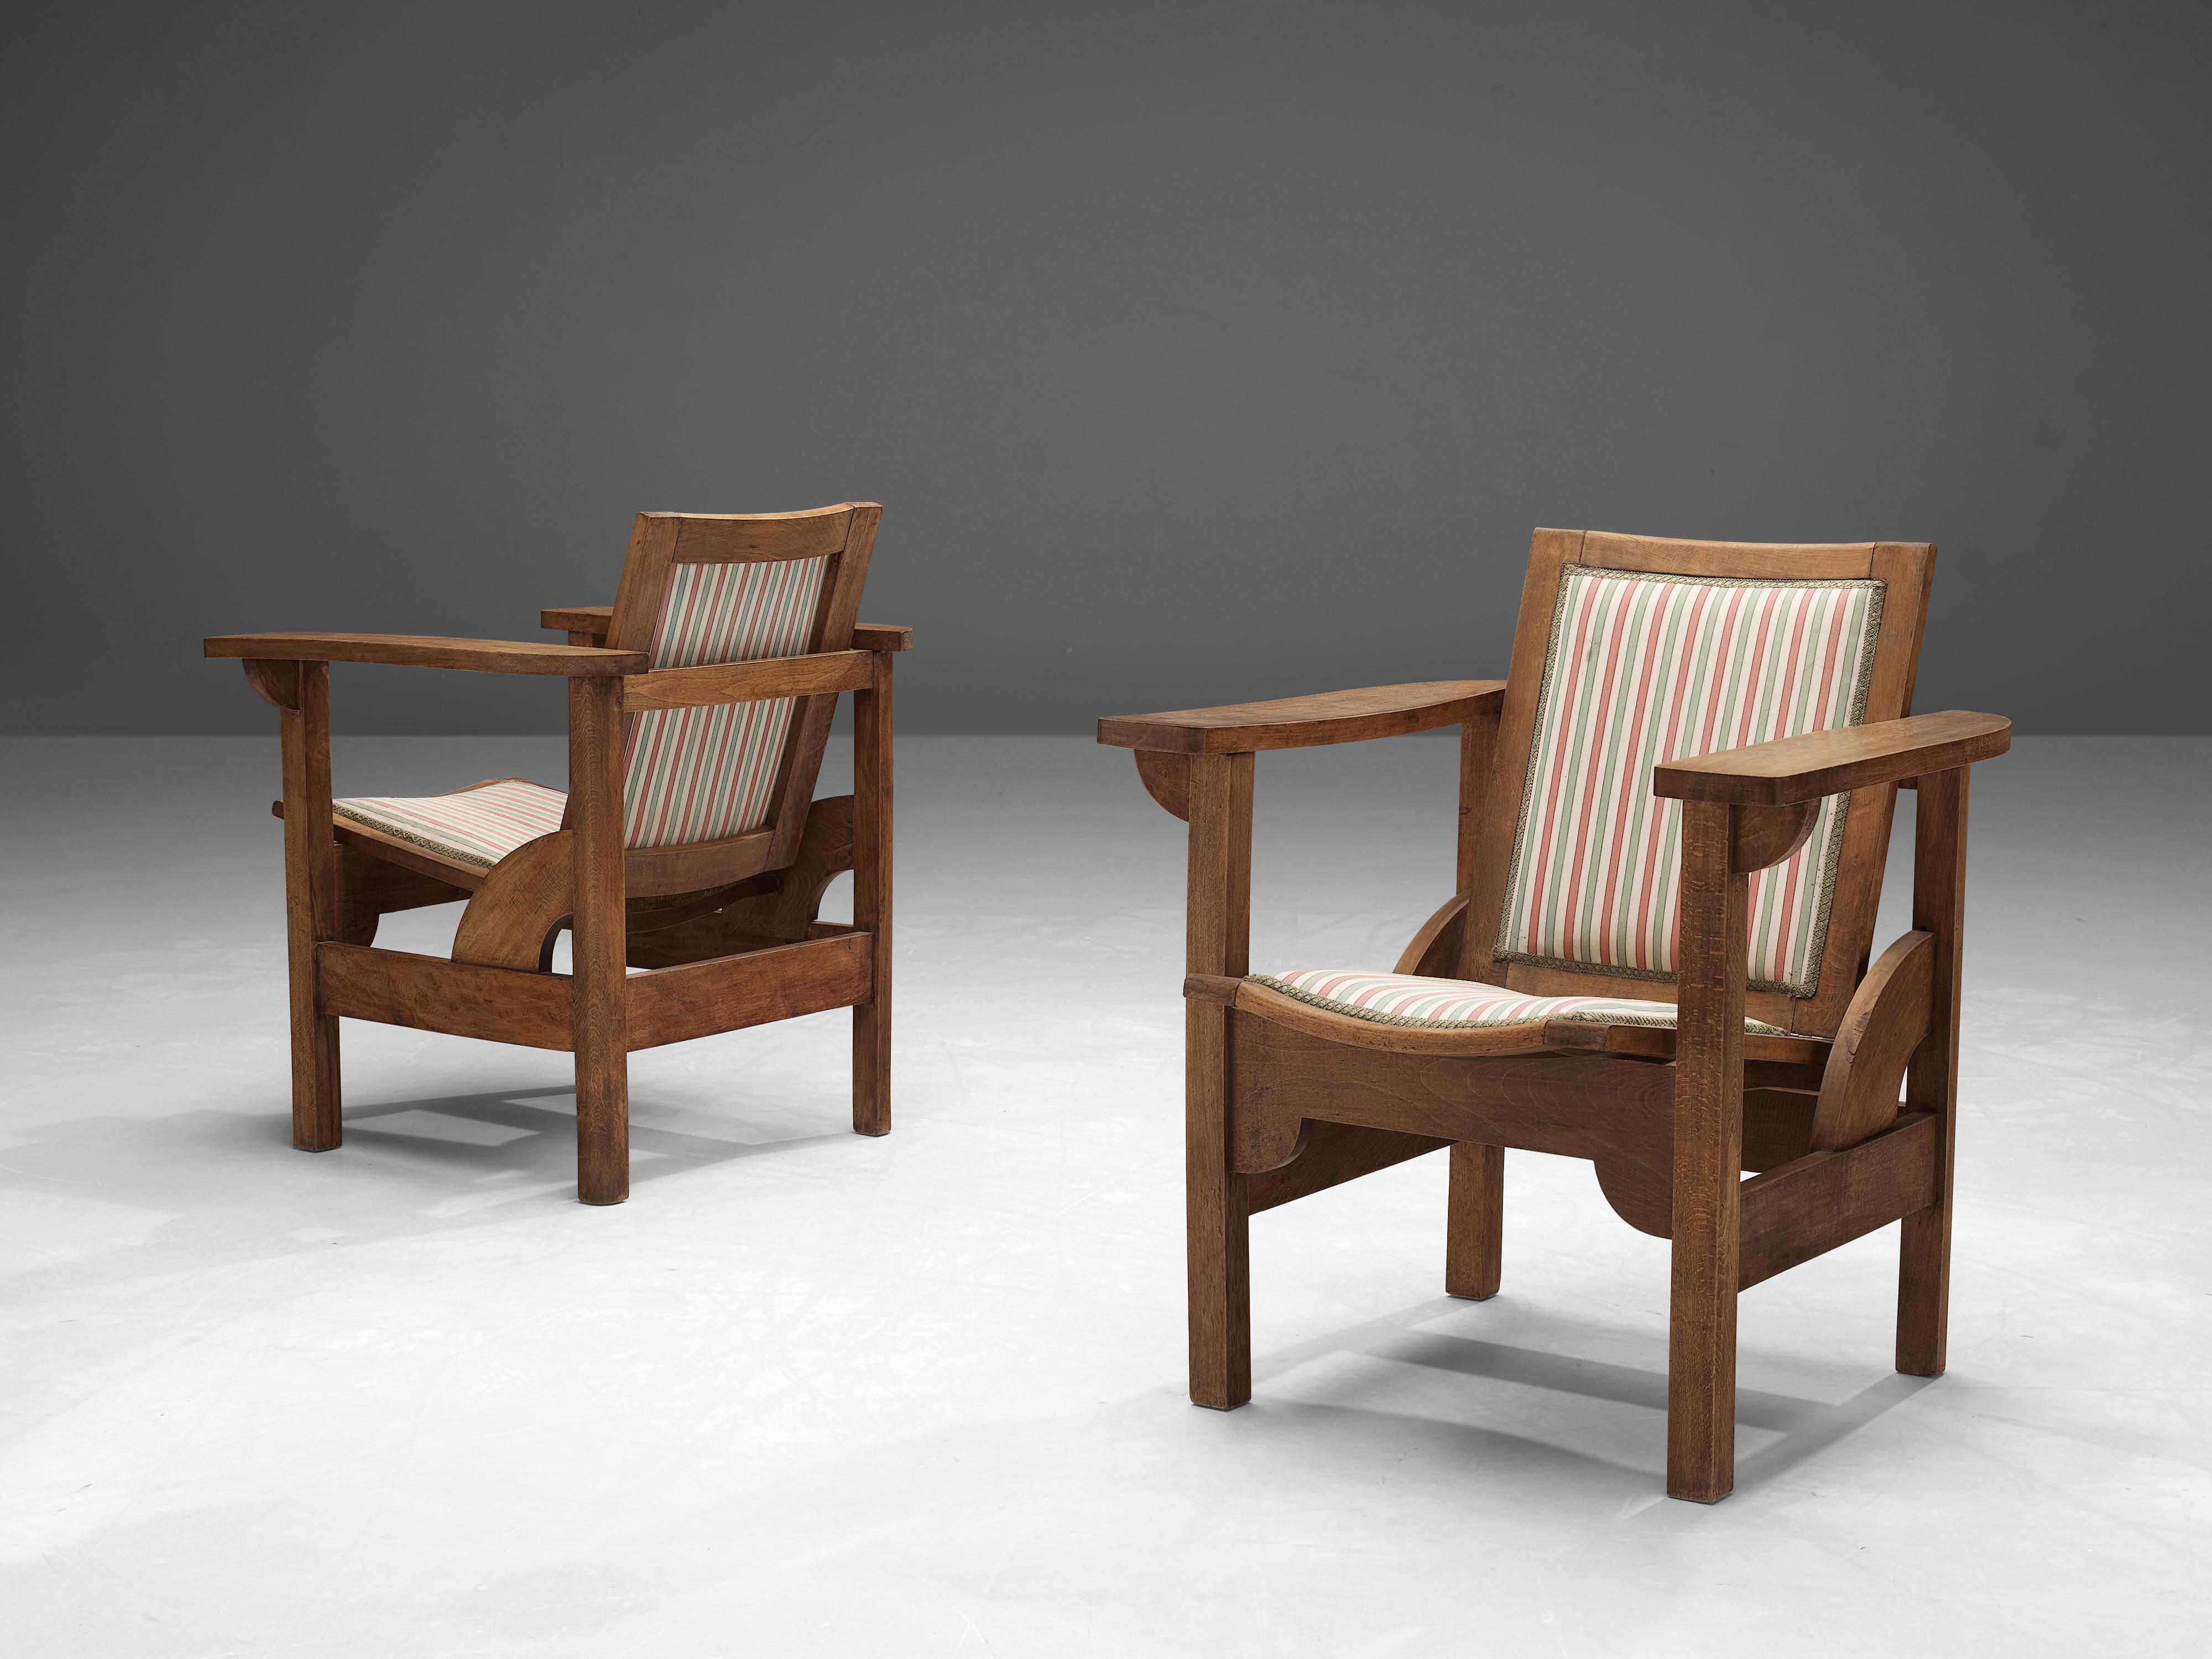 Pierre Dariel, pair of Hendaye armchairs, beech, fabric, France, 1930s

Pair of armchairs designed by Pierre Dariel in the 1930s. The structure is composed entirely out of beech, while the seat and backrest are upholstered. Unique to these chairs is